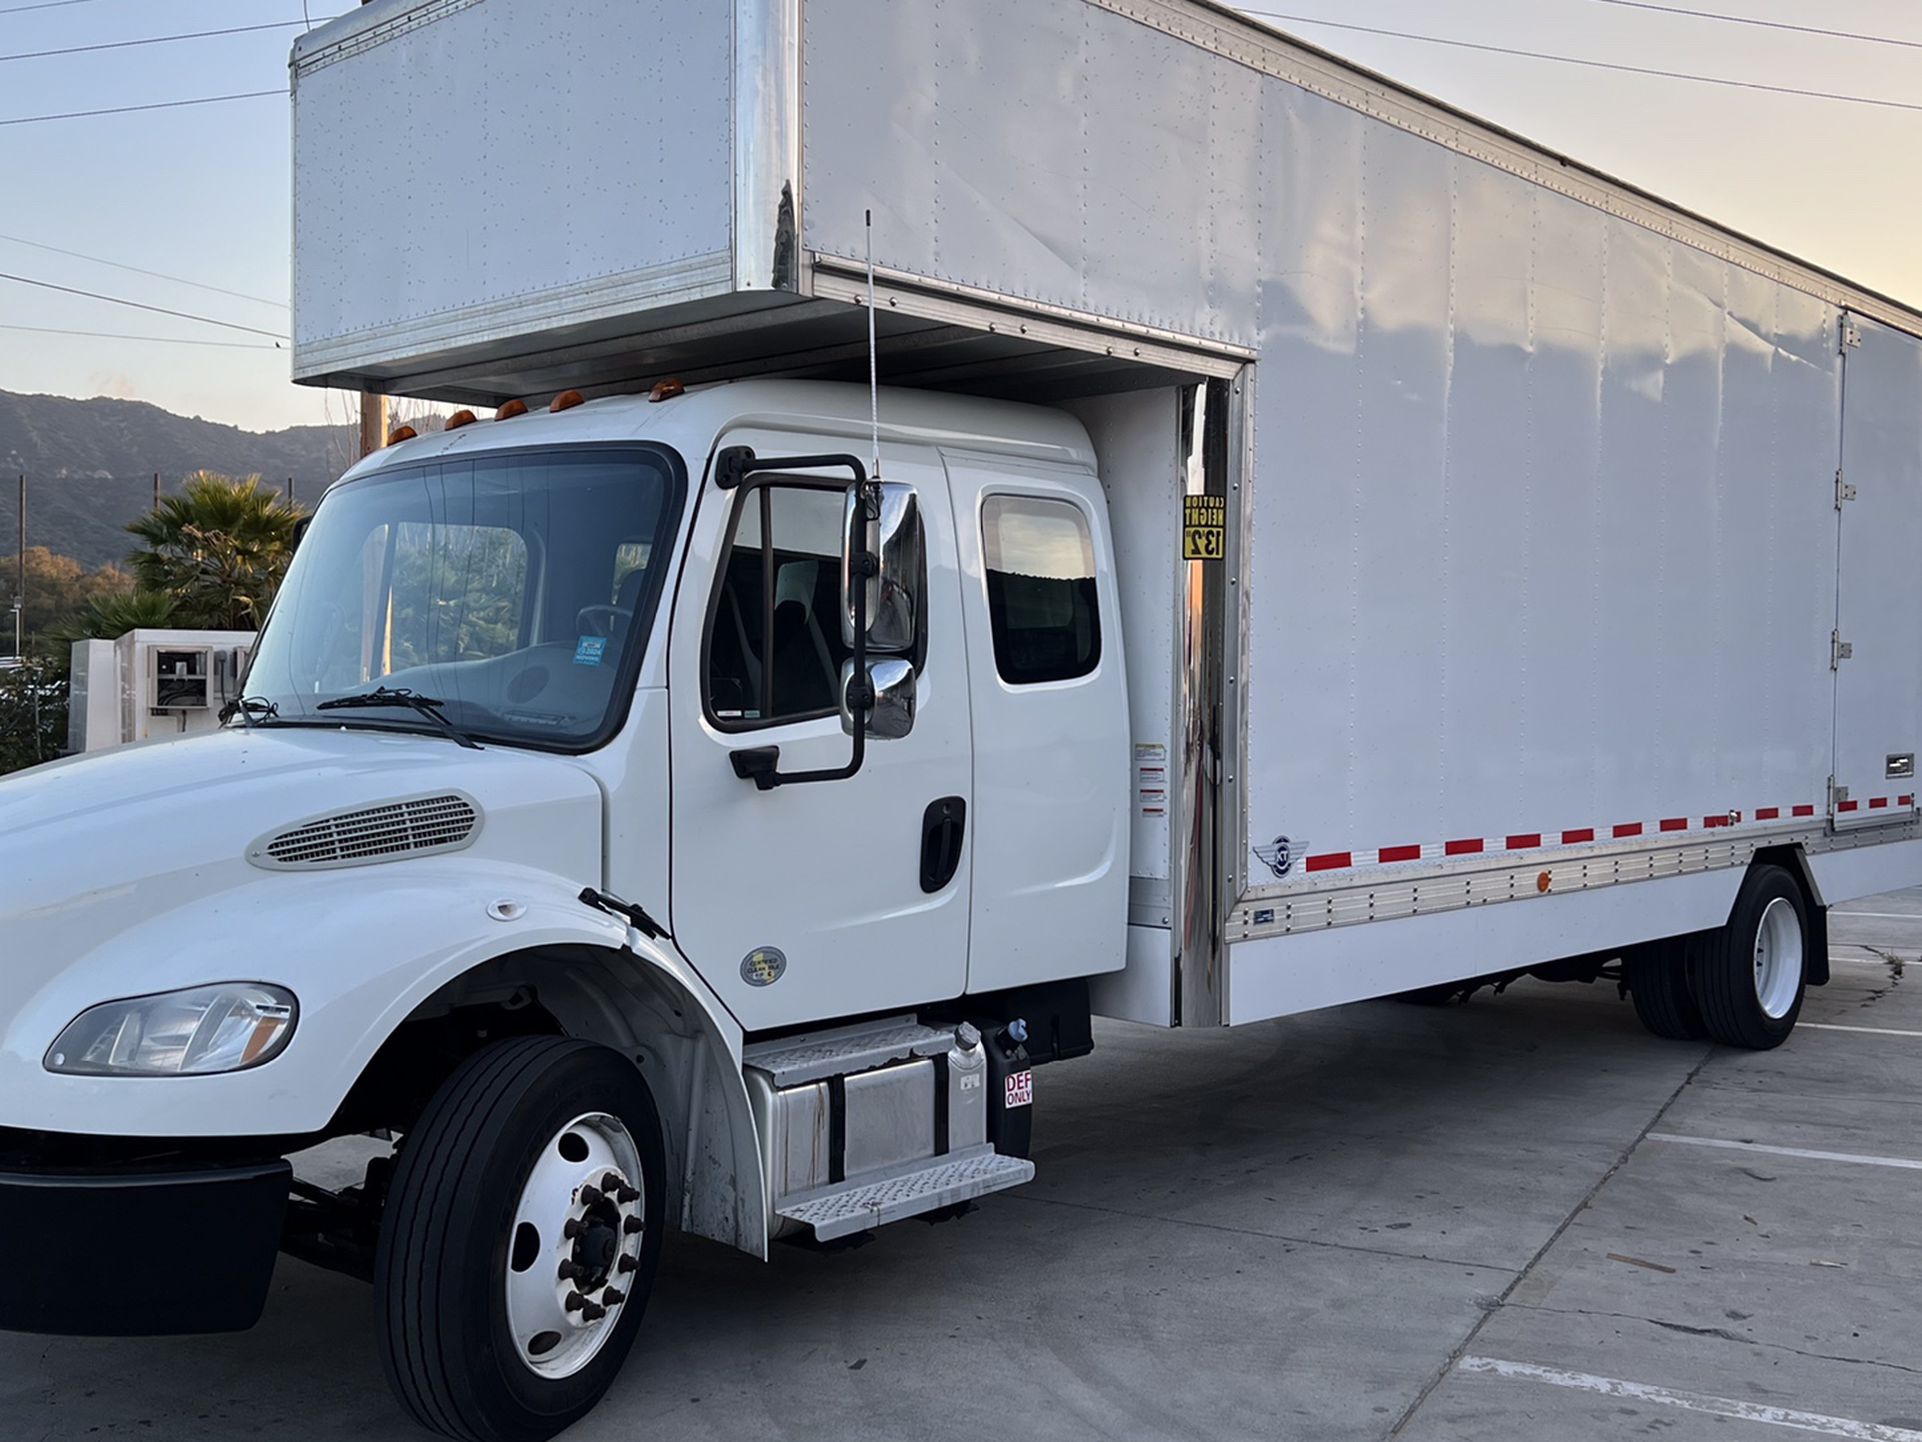 2018 Freightliner M2 Extended Cab 26ft Box Truck